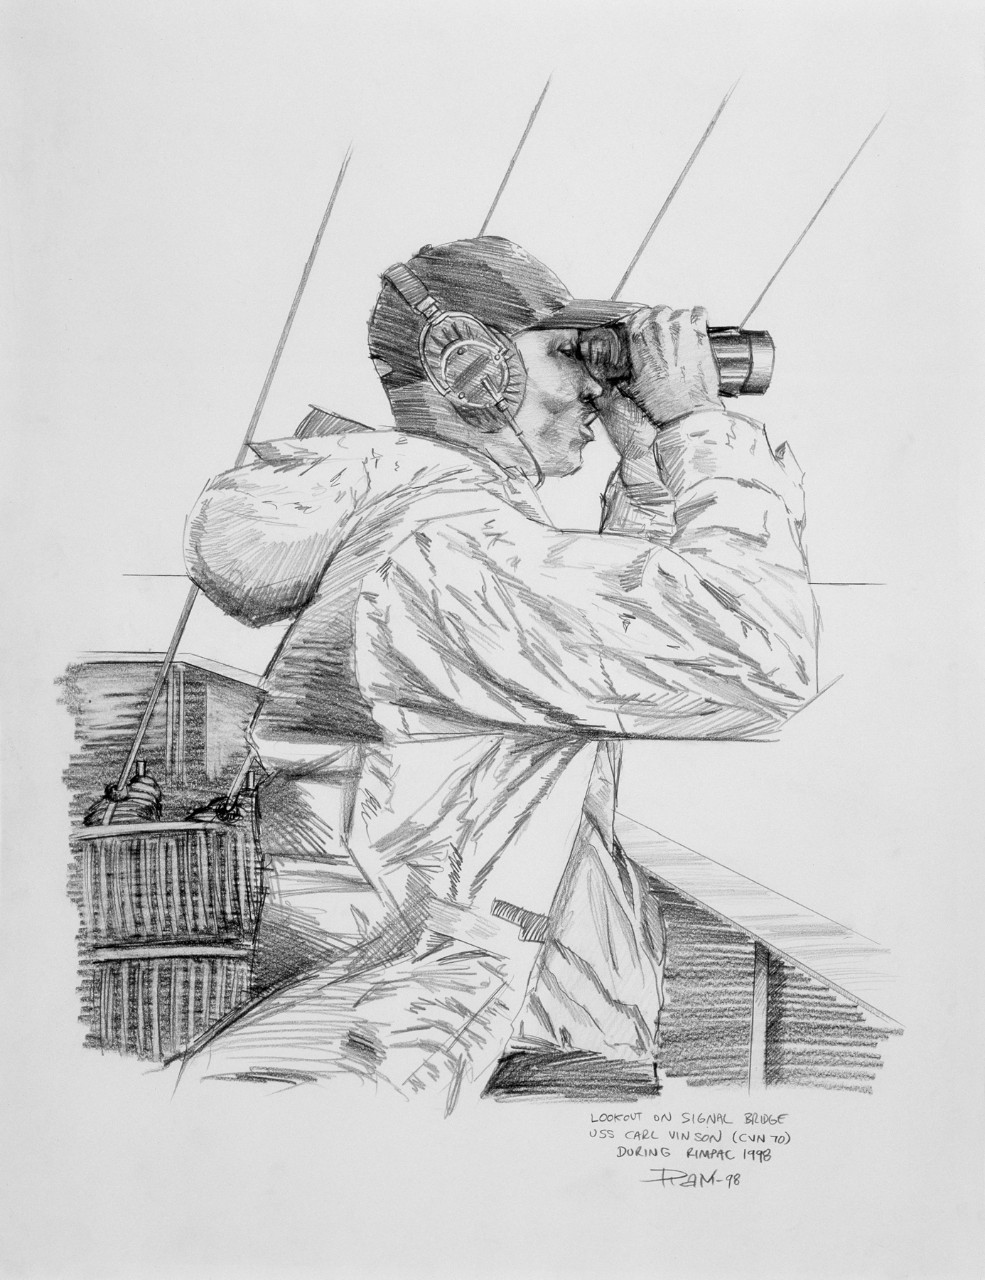 A man with binoculars looks out over the railing